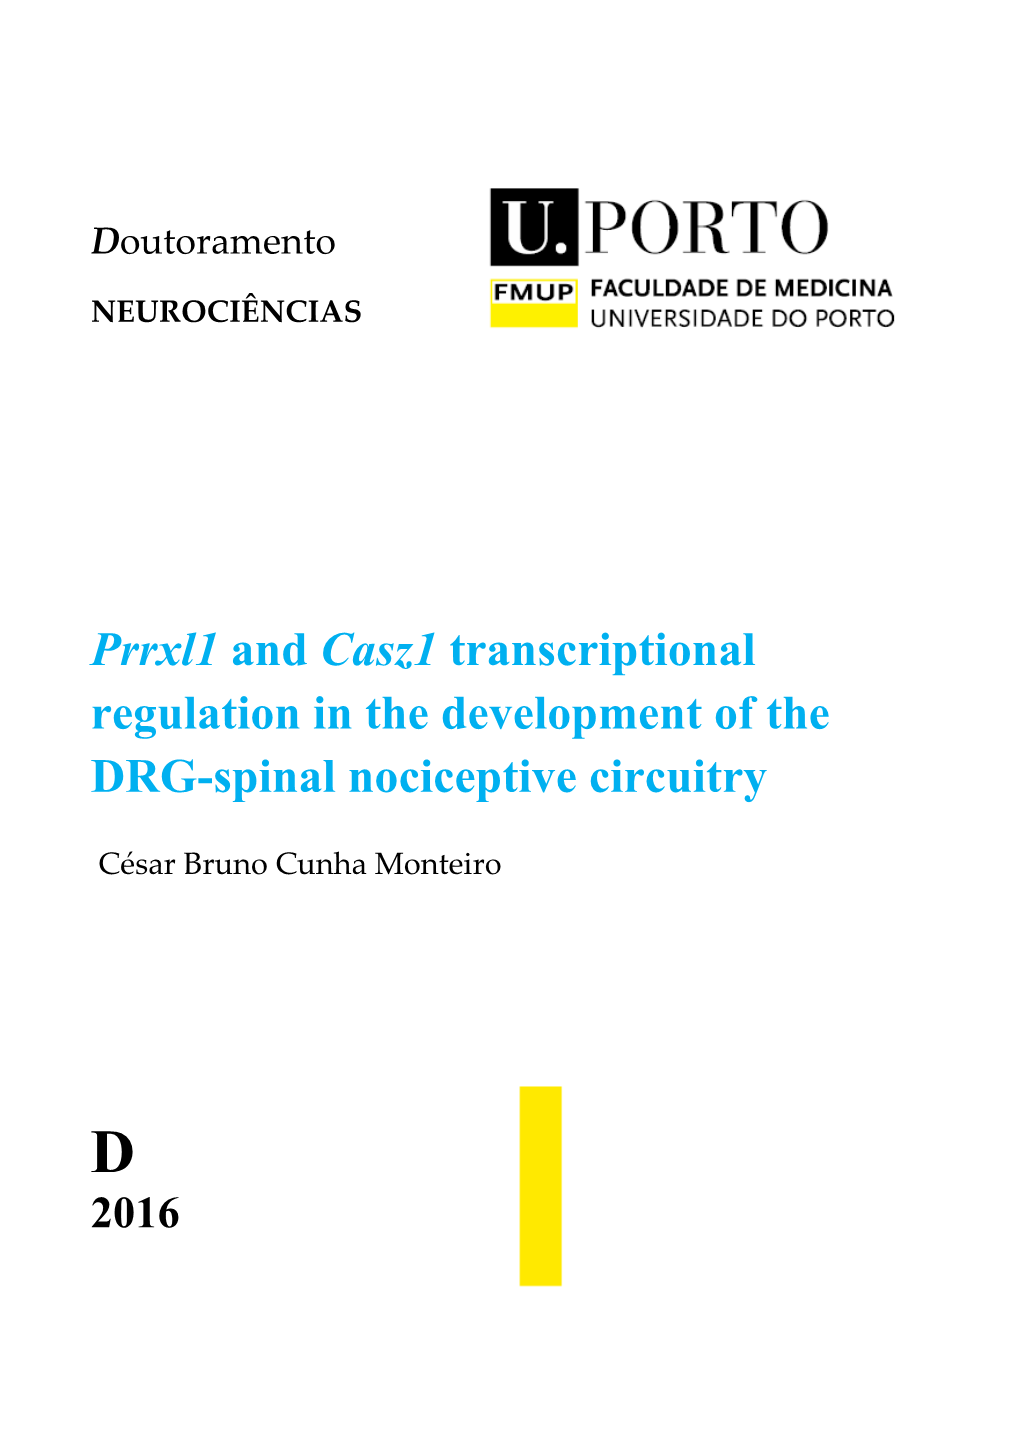 Prrxl1 and Casz1 Transcriptional Regulation in the Development of the DRG-Spinal Nociceptive Circuitry